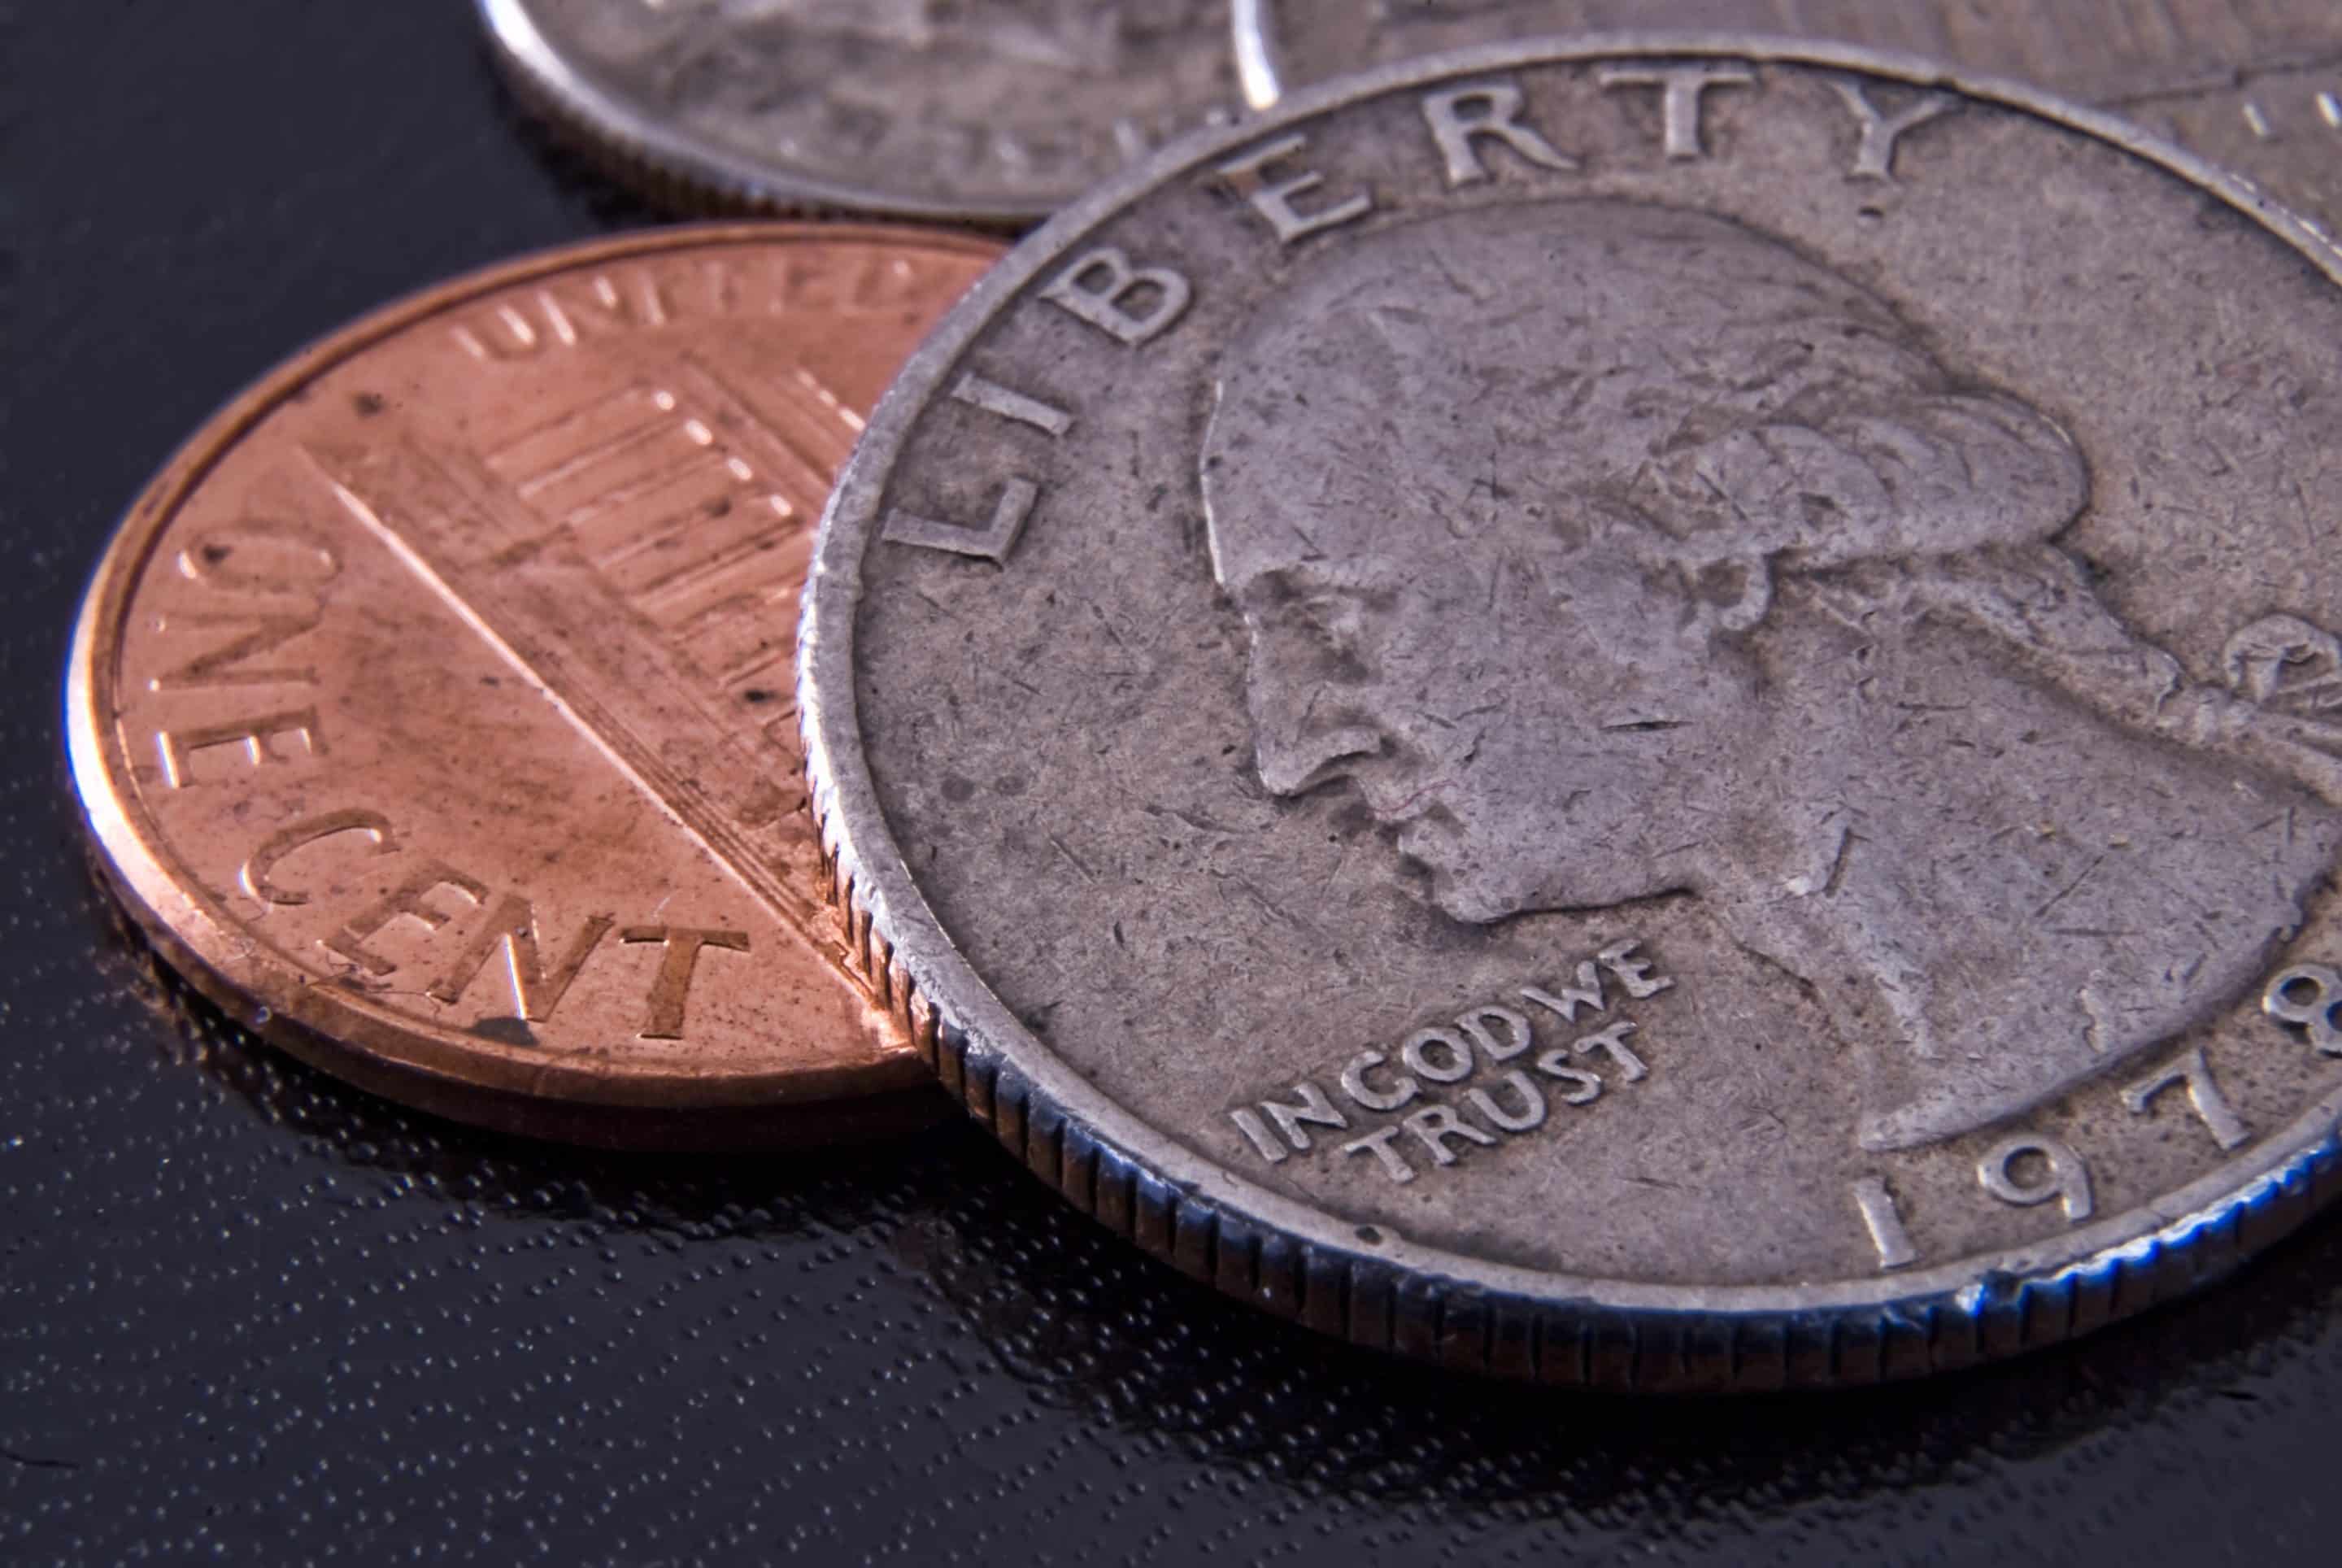 The Idea of Making a ‘Trillion Dollar Coin’ Is Still Dumb